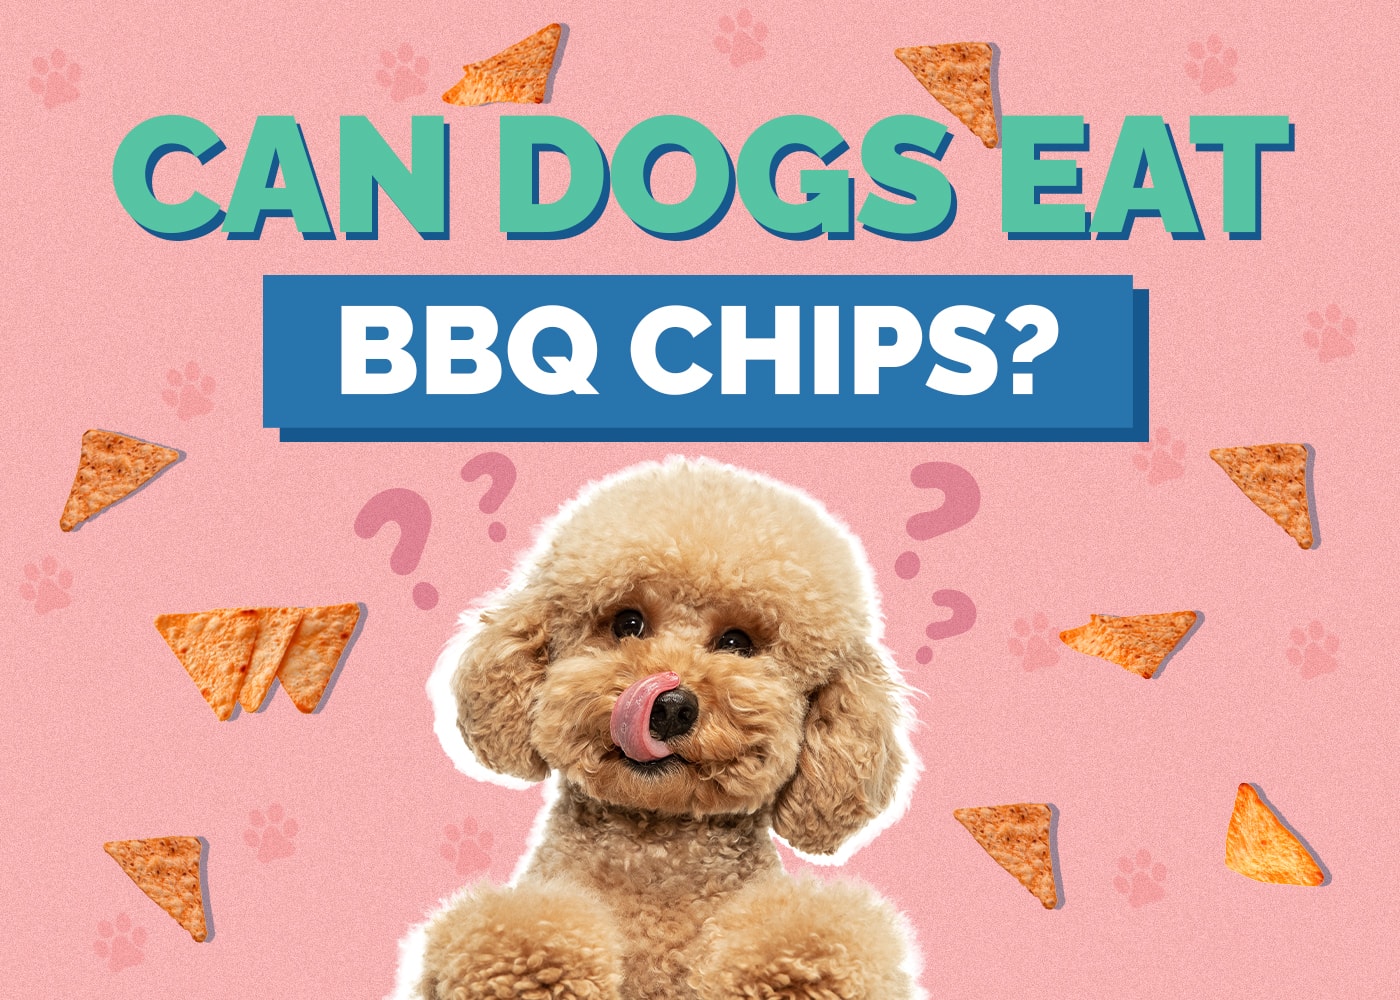 Can Dogs Eat BBQ Chips